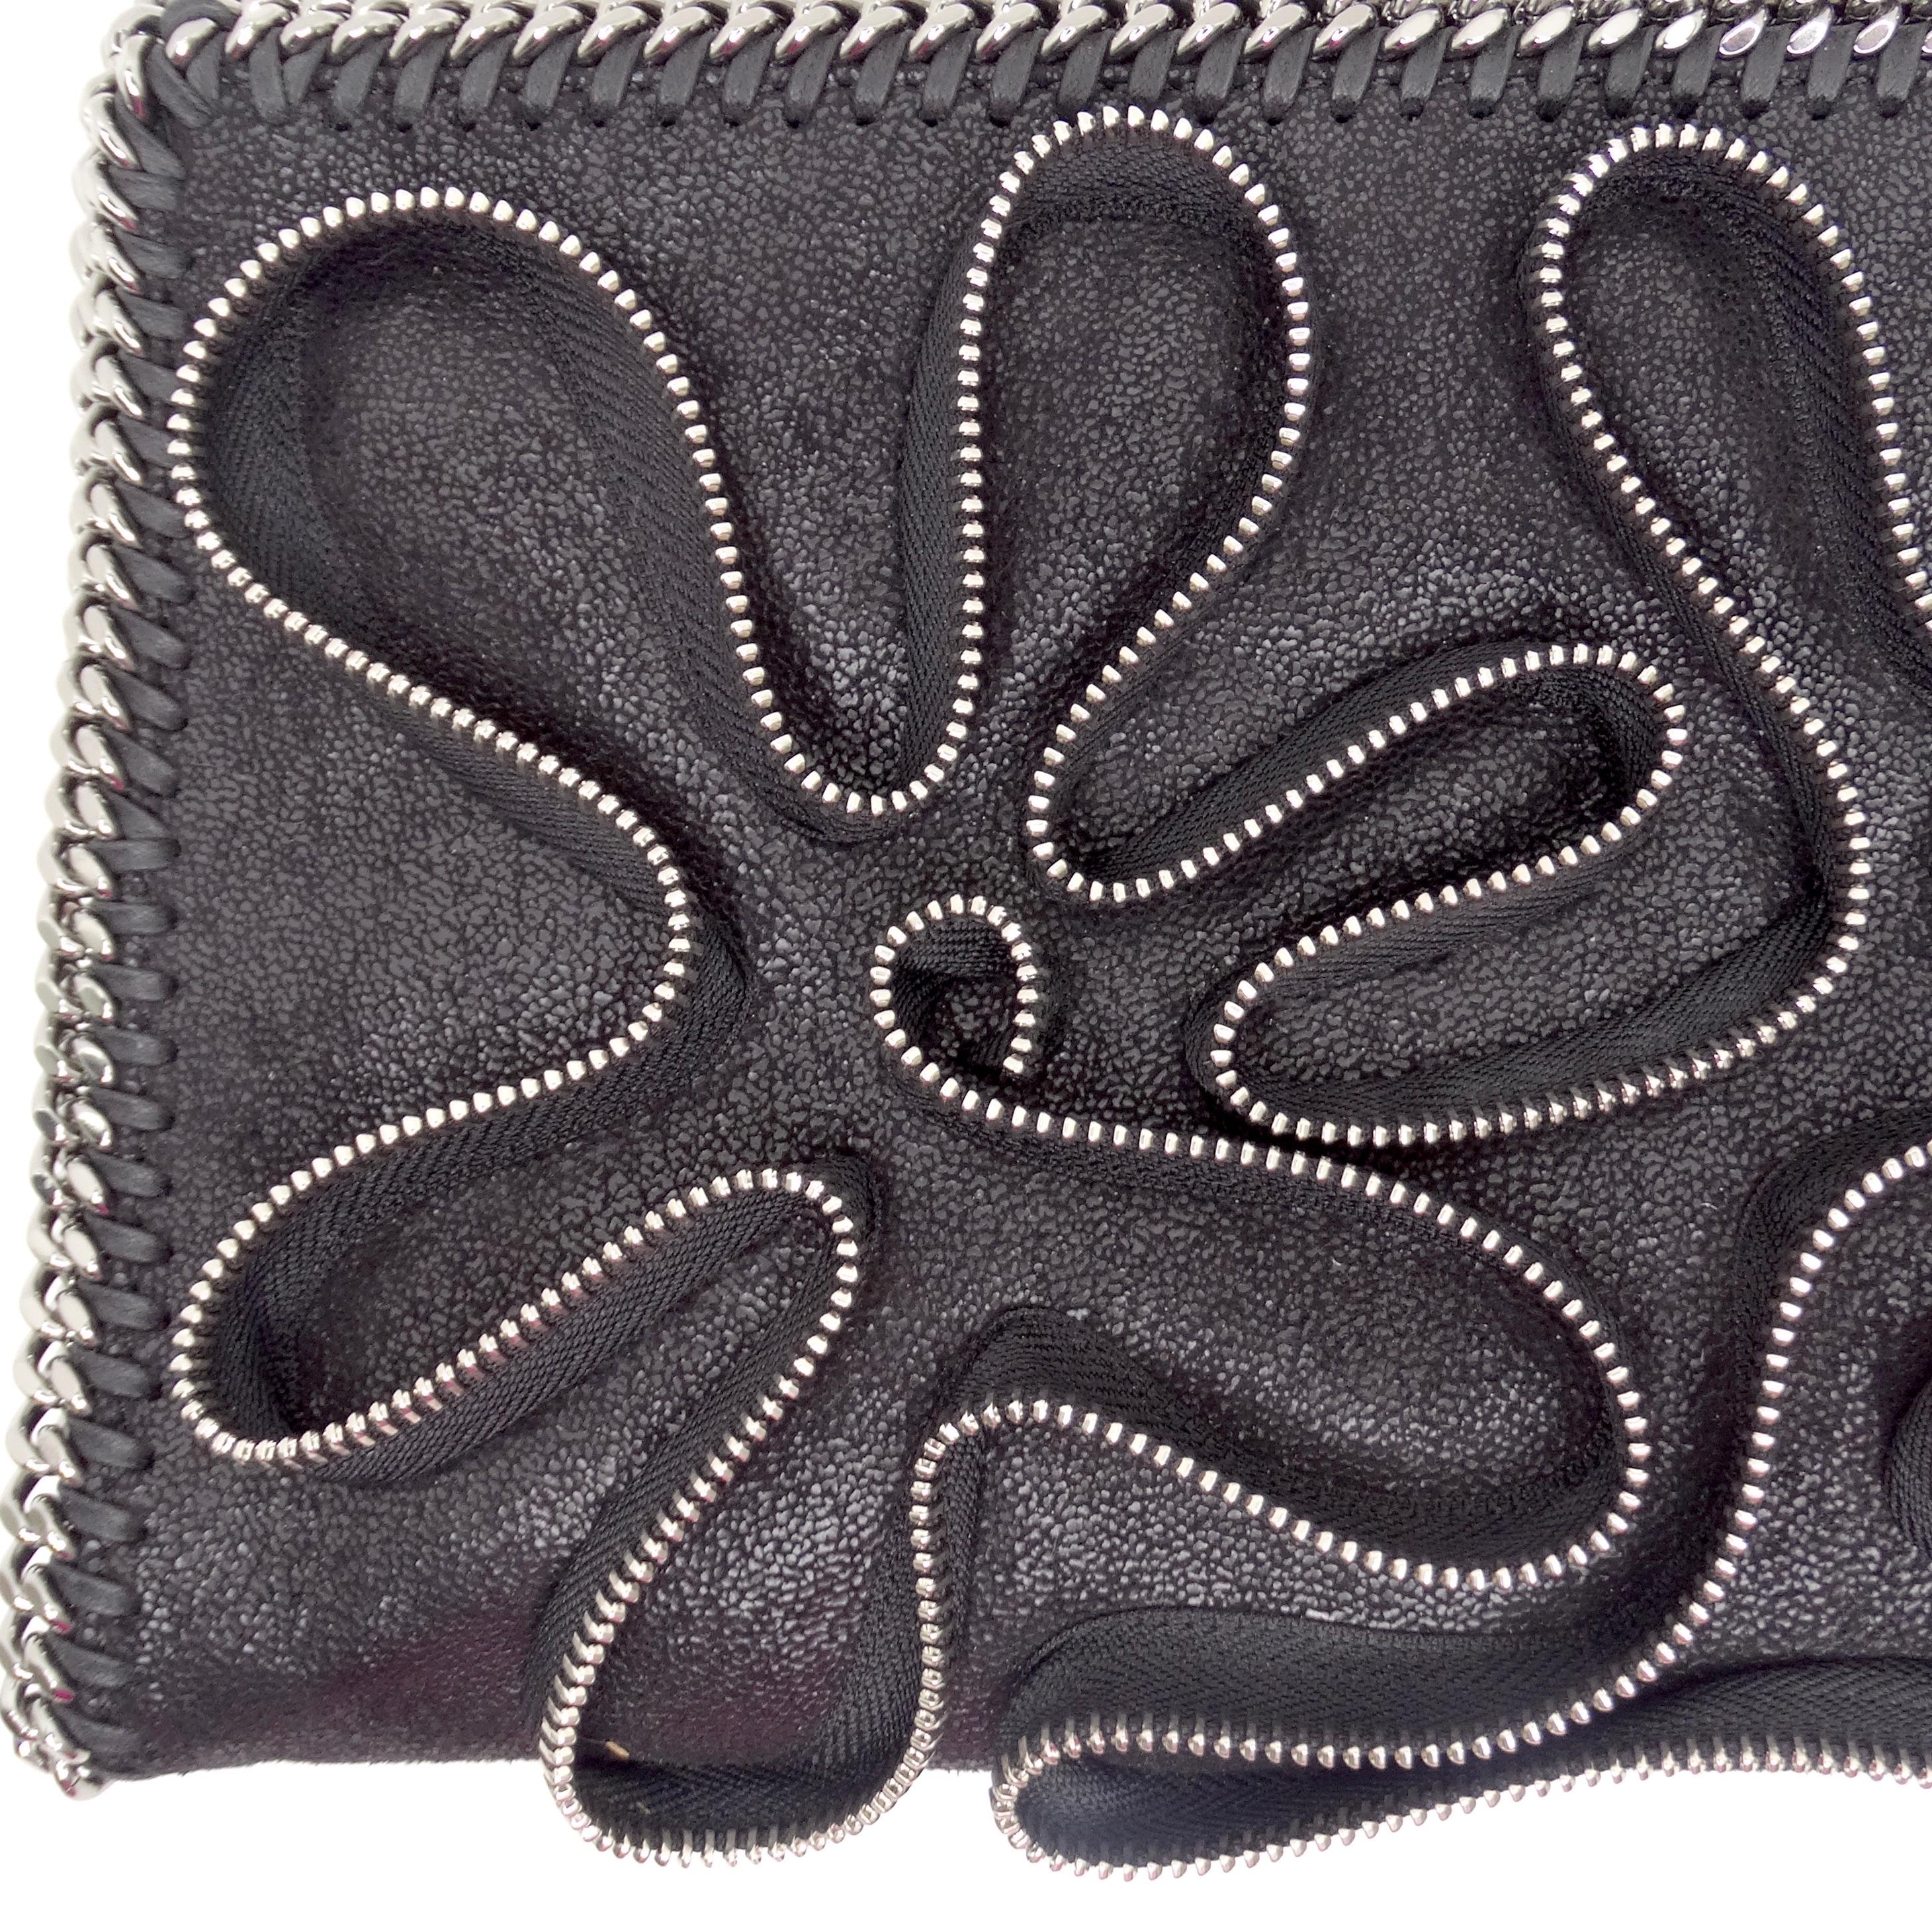 Introducing the Stella McCartney Falabella Zipper Trim Fold Over Clutch, a stunning and unique accessory that effortlessly combines edgy flair with timeless elegance. Crafted from luxurious black faux leather, this fold-over clutch features a